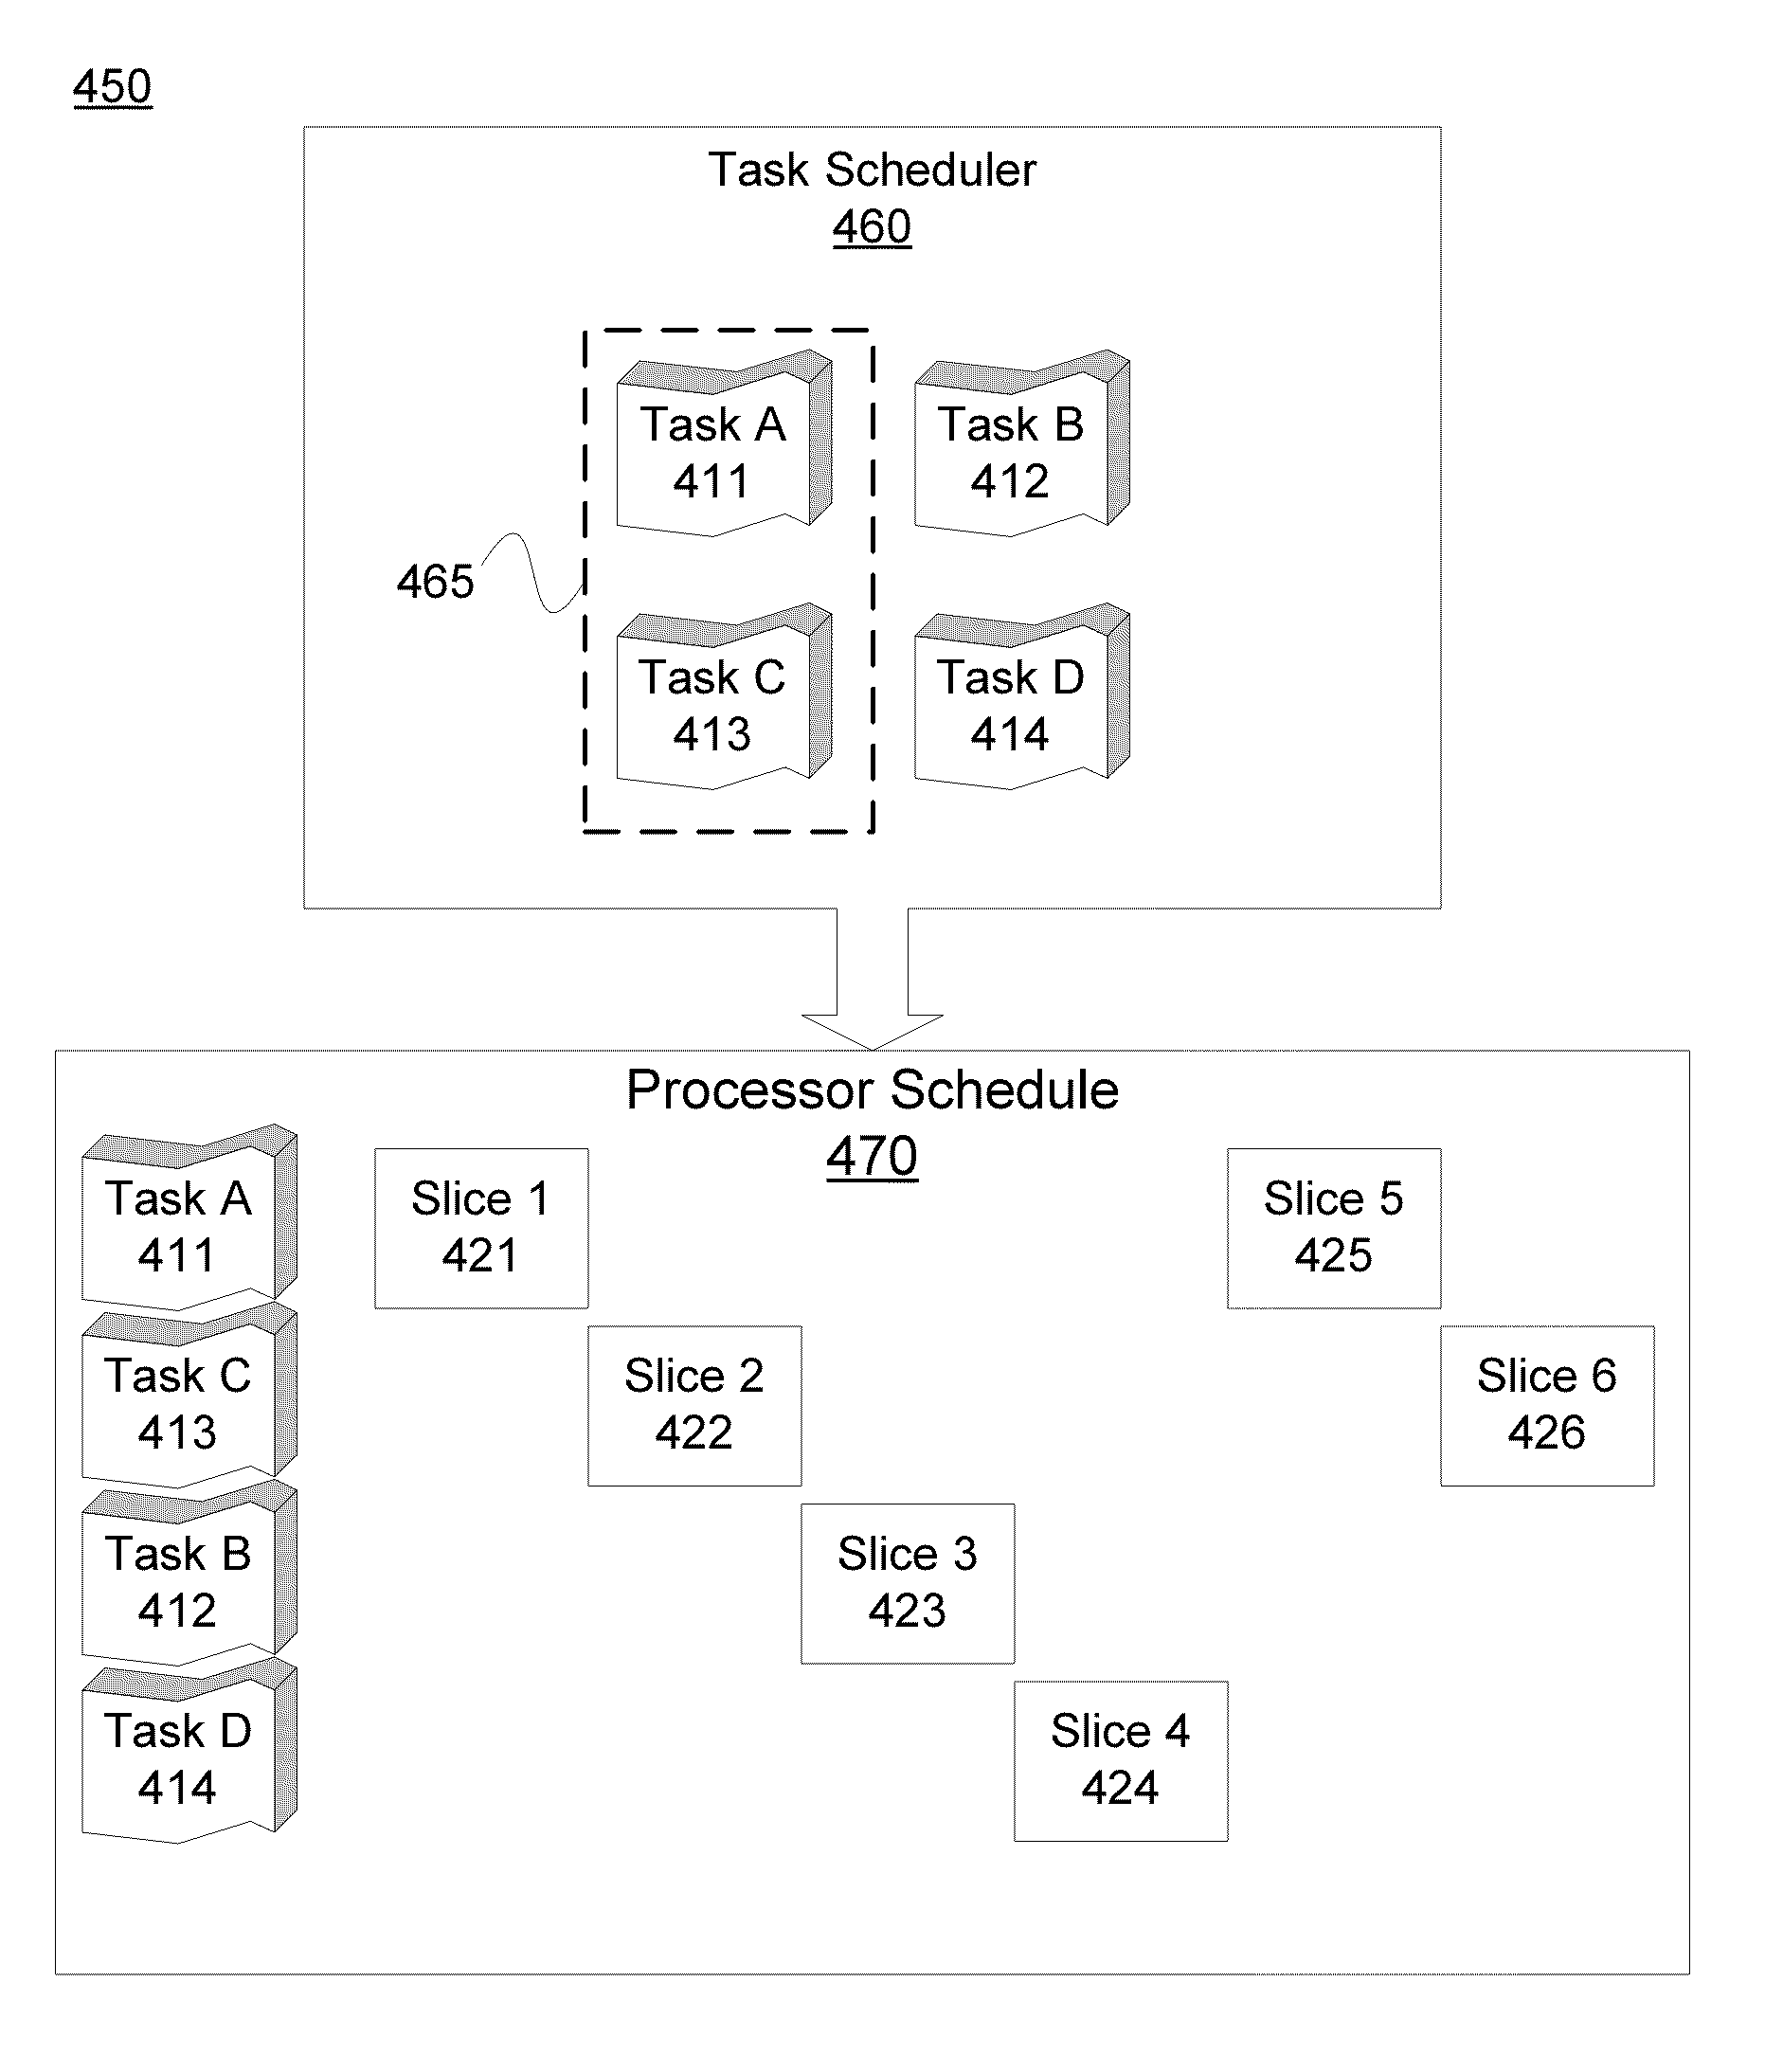 Non-preemption of a group of interchangeable tasks in a computing device